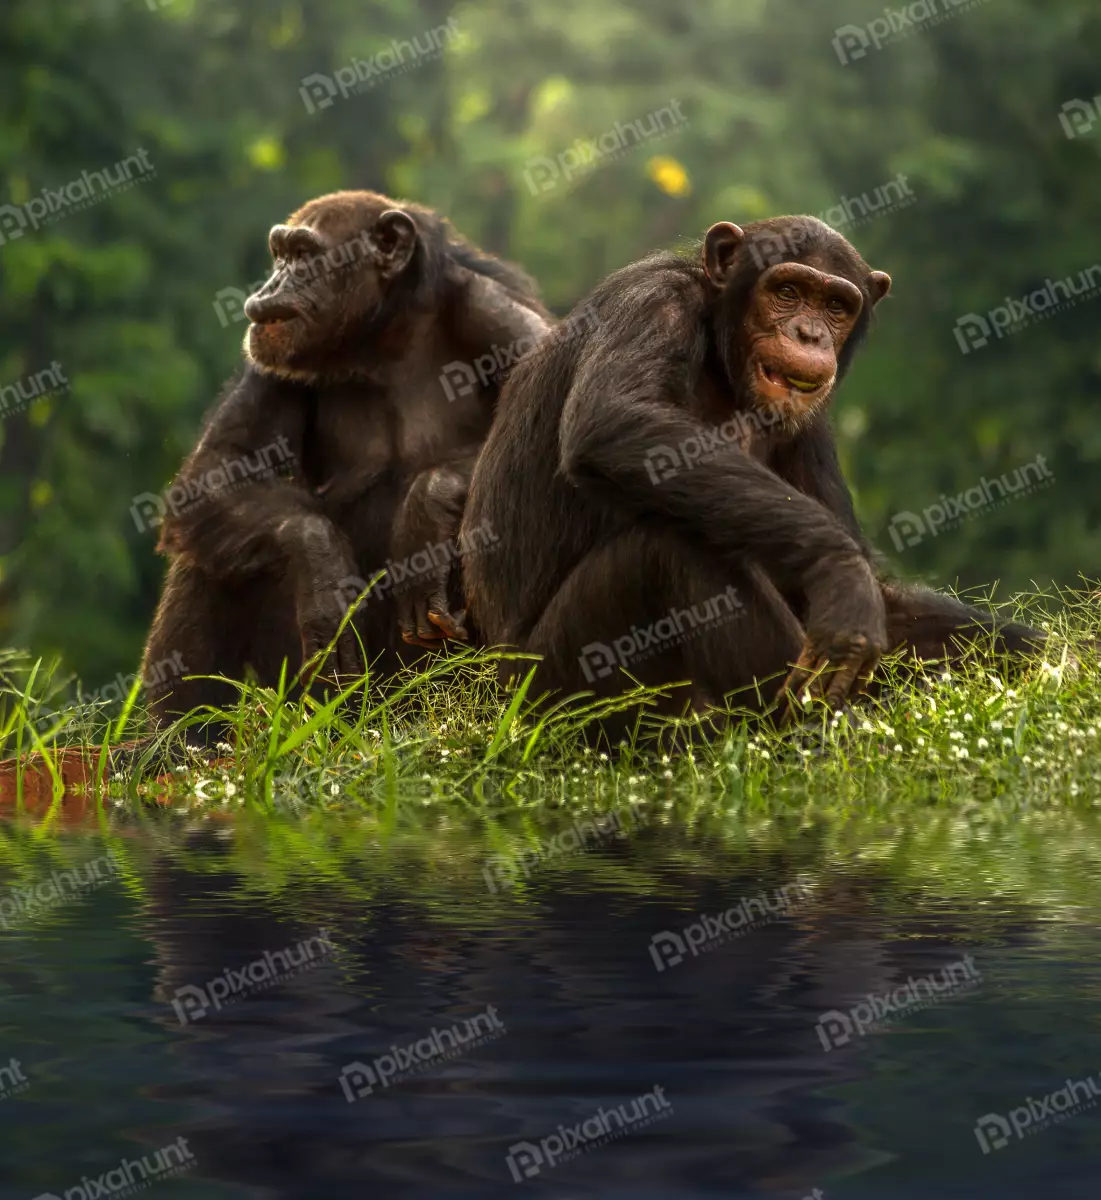 Free Premium Stock Photos Two chimpanzees sitting on a rock in front of a lush and chimpanzees are looking in different directions